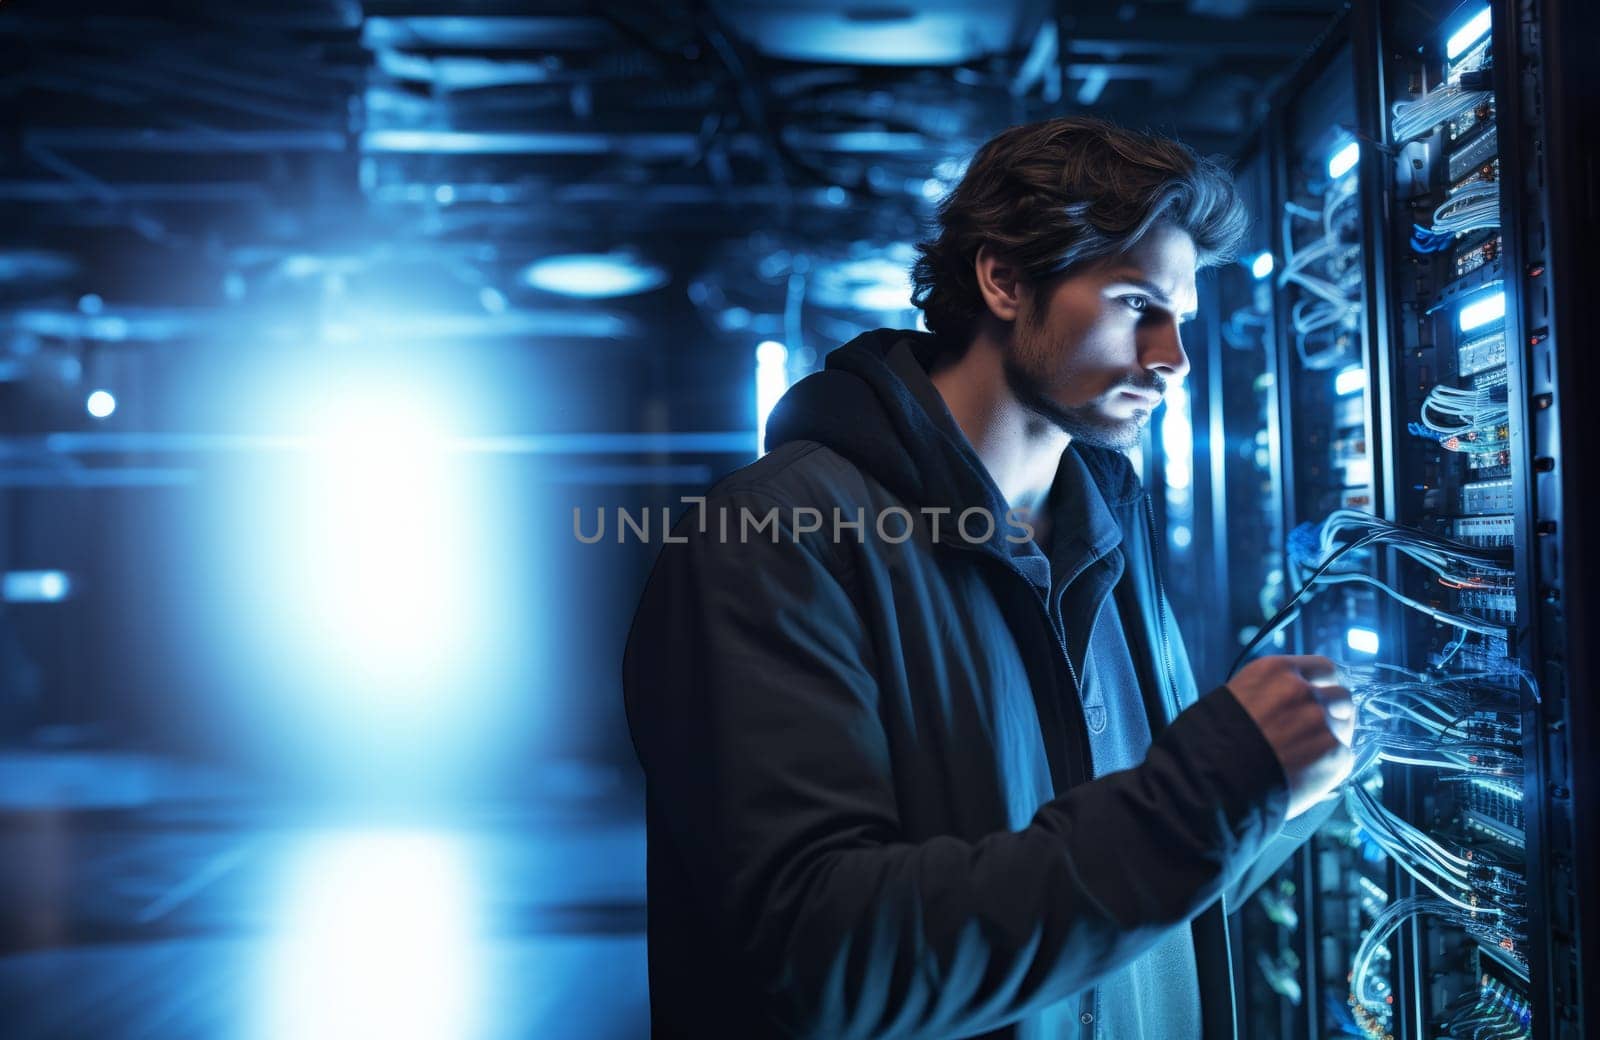 The technician is on a mission to keep the servers running smoothly and prevent any downtime.